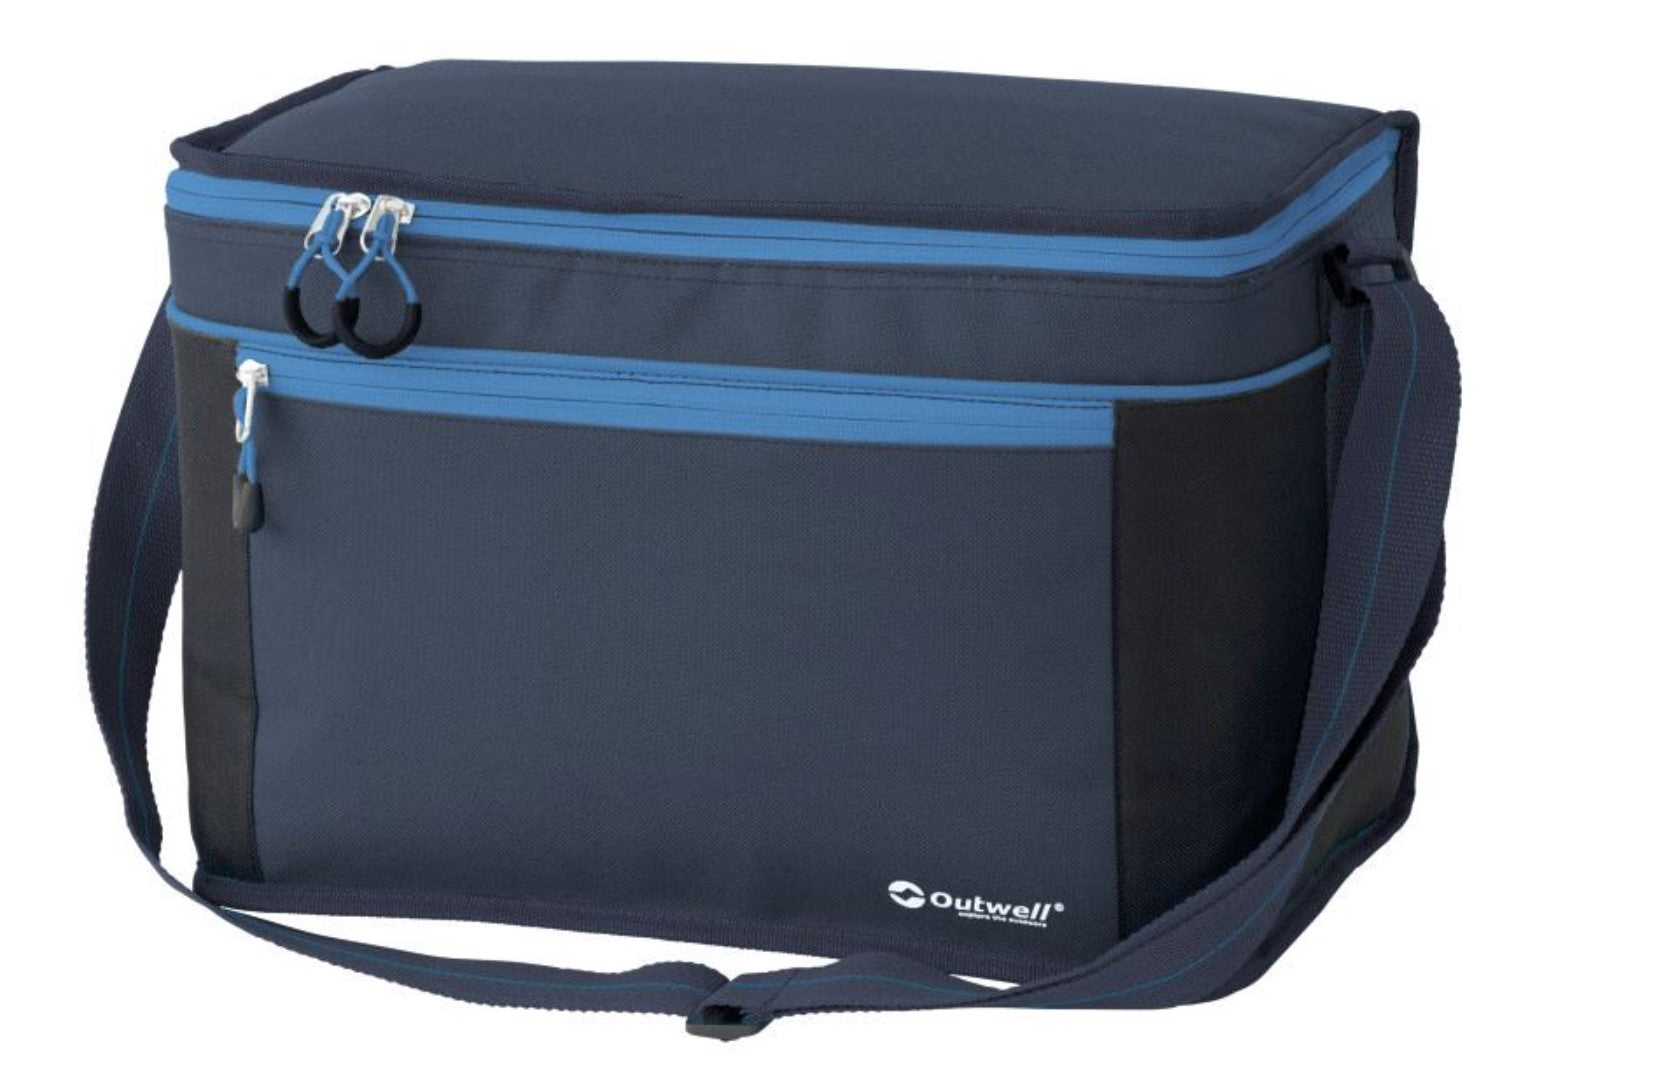 Outwell Coolbag Petrel Dark Blue Large